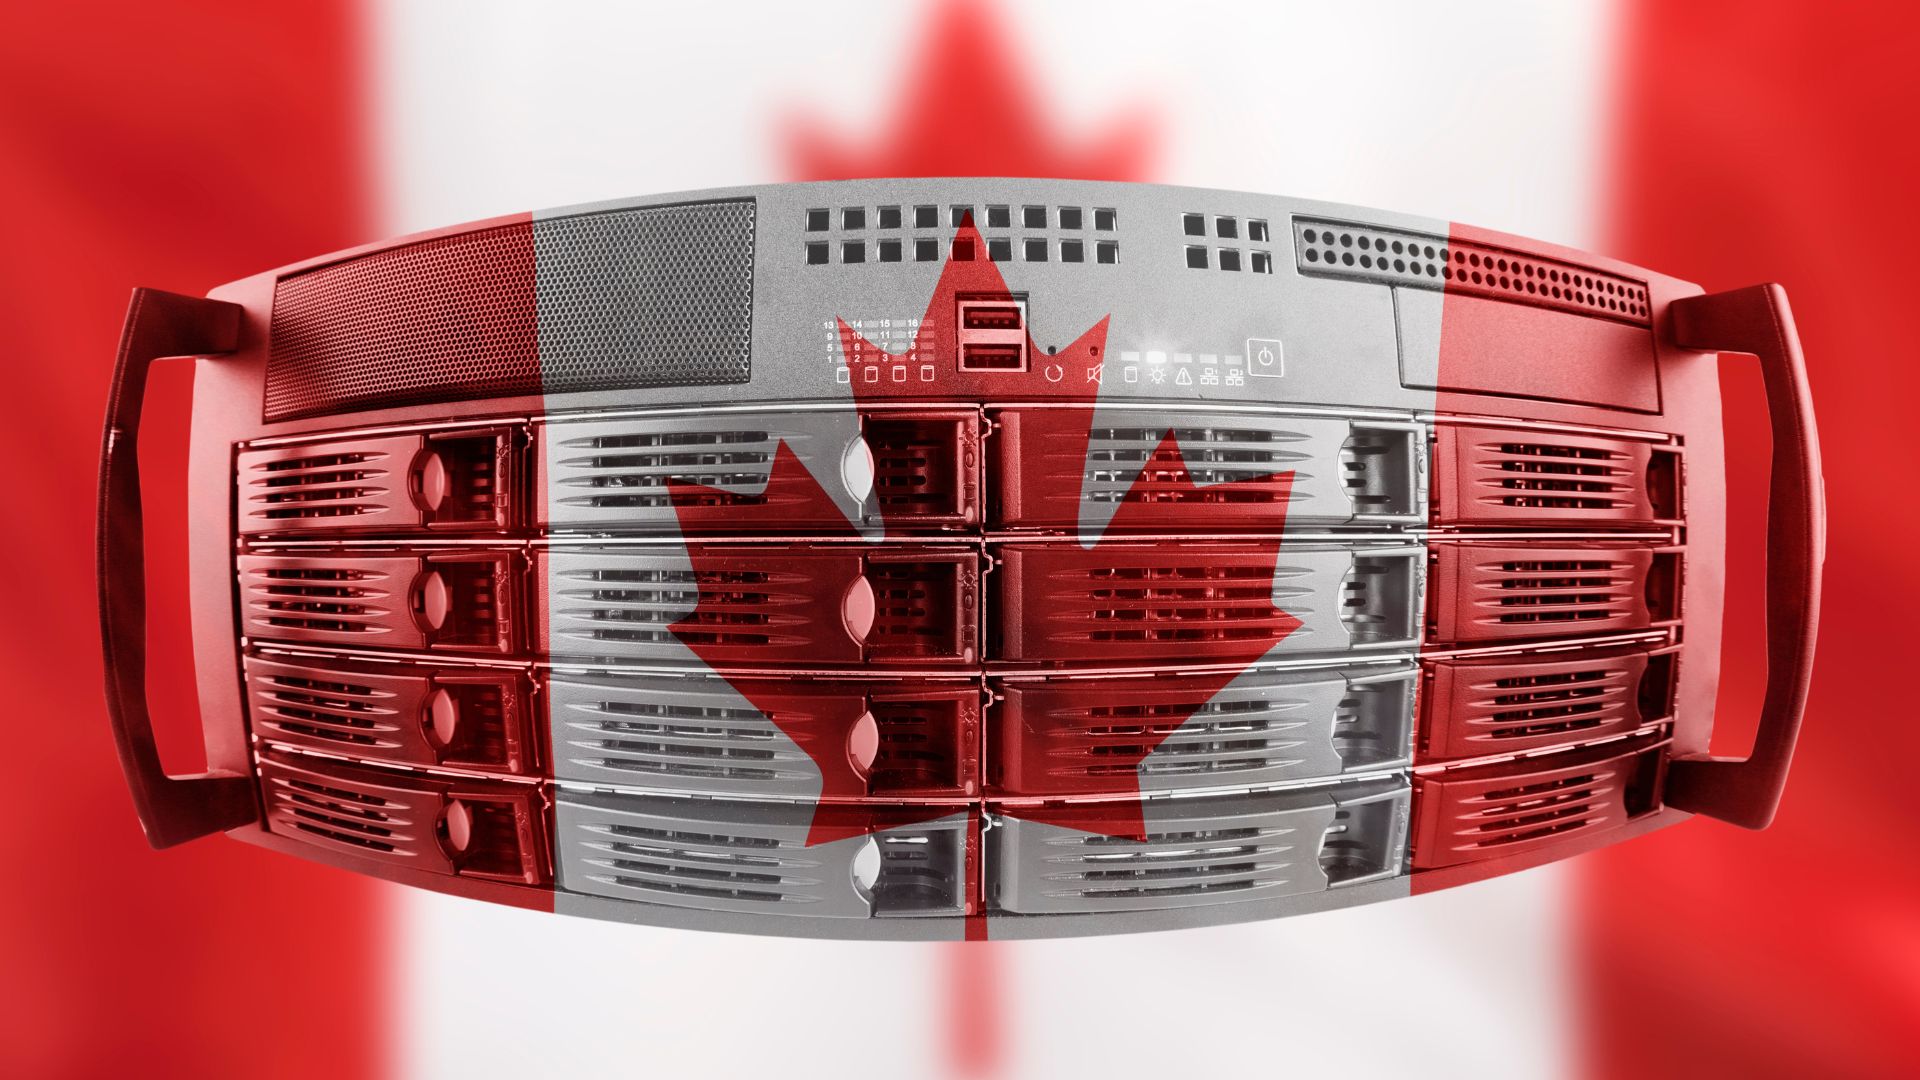 Canadian flag with web servers in the background